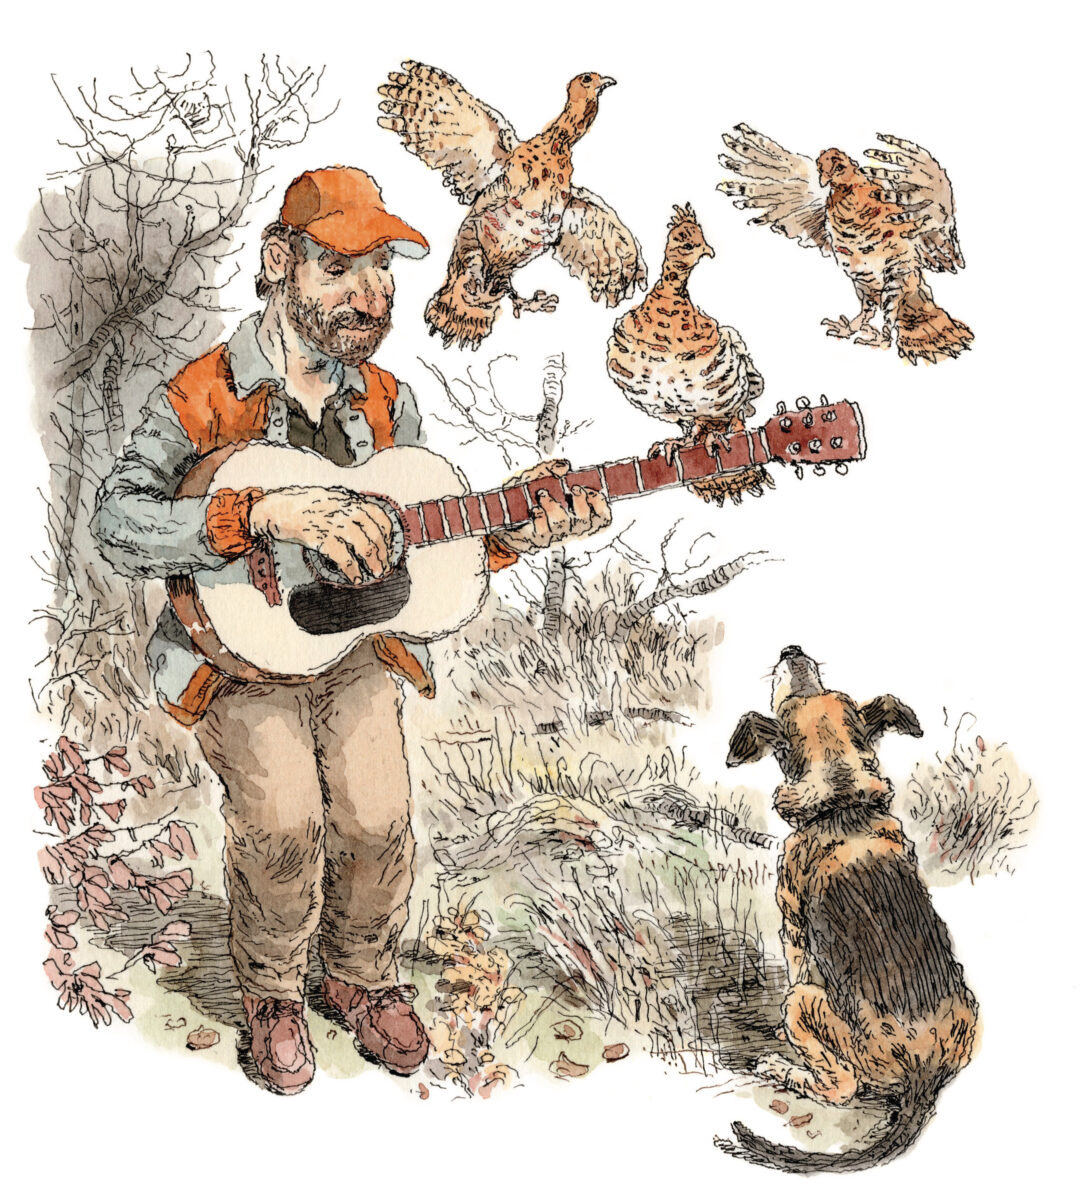 a-musician-unleashes-a-rescue-pup’s-bird-dog-soul